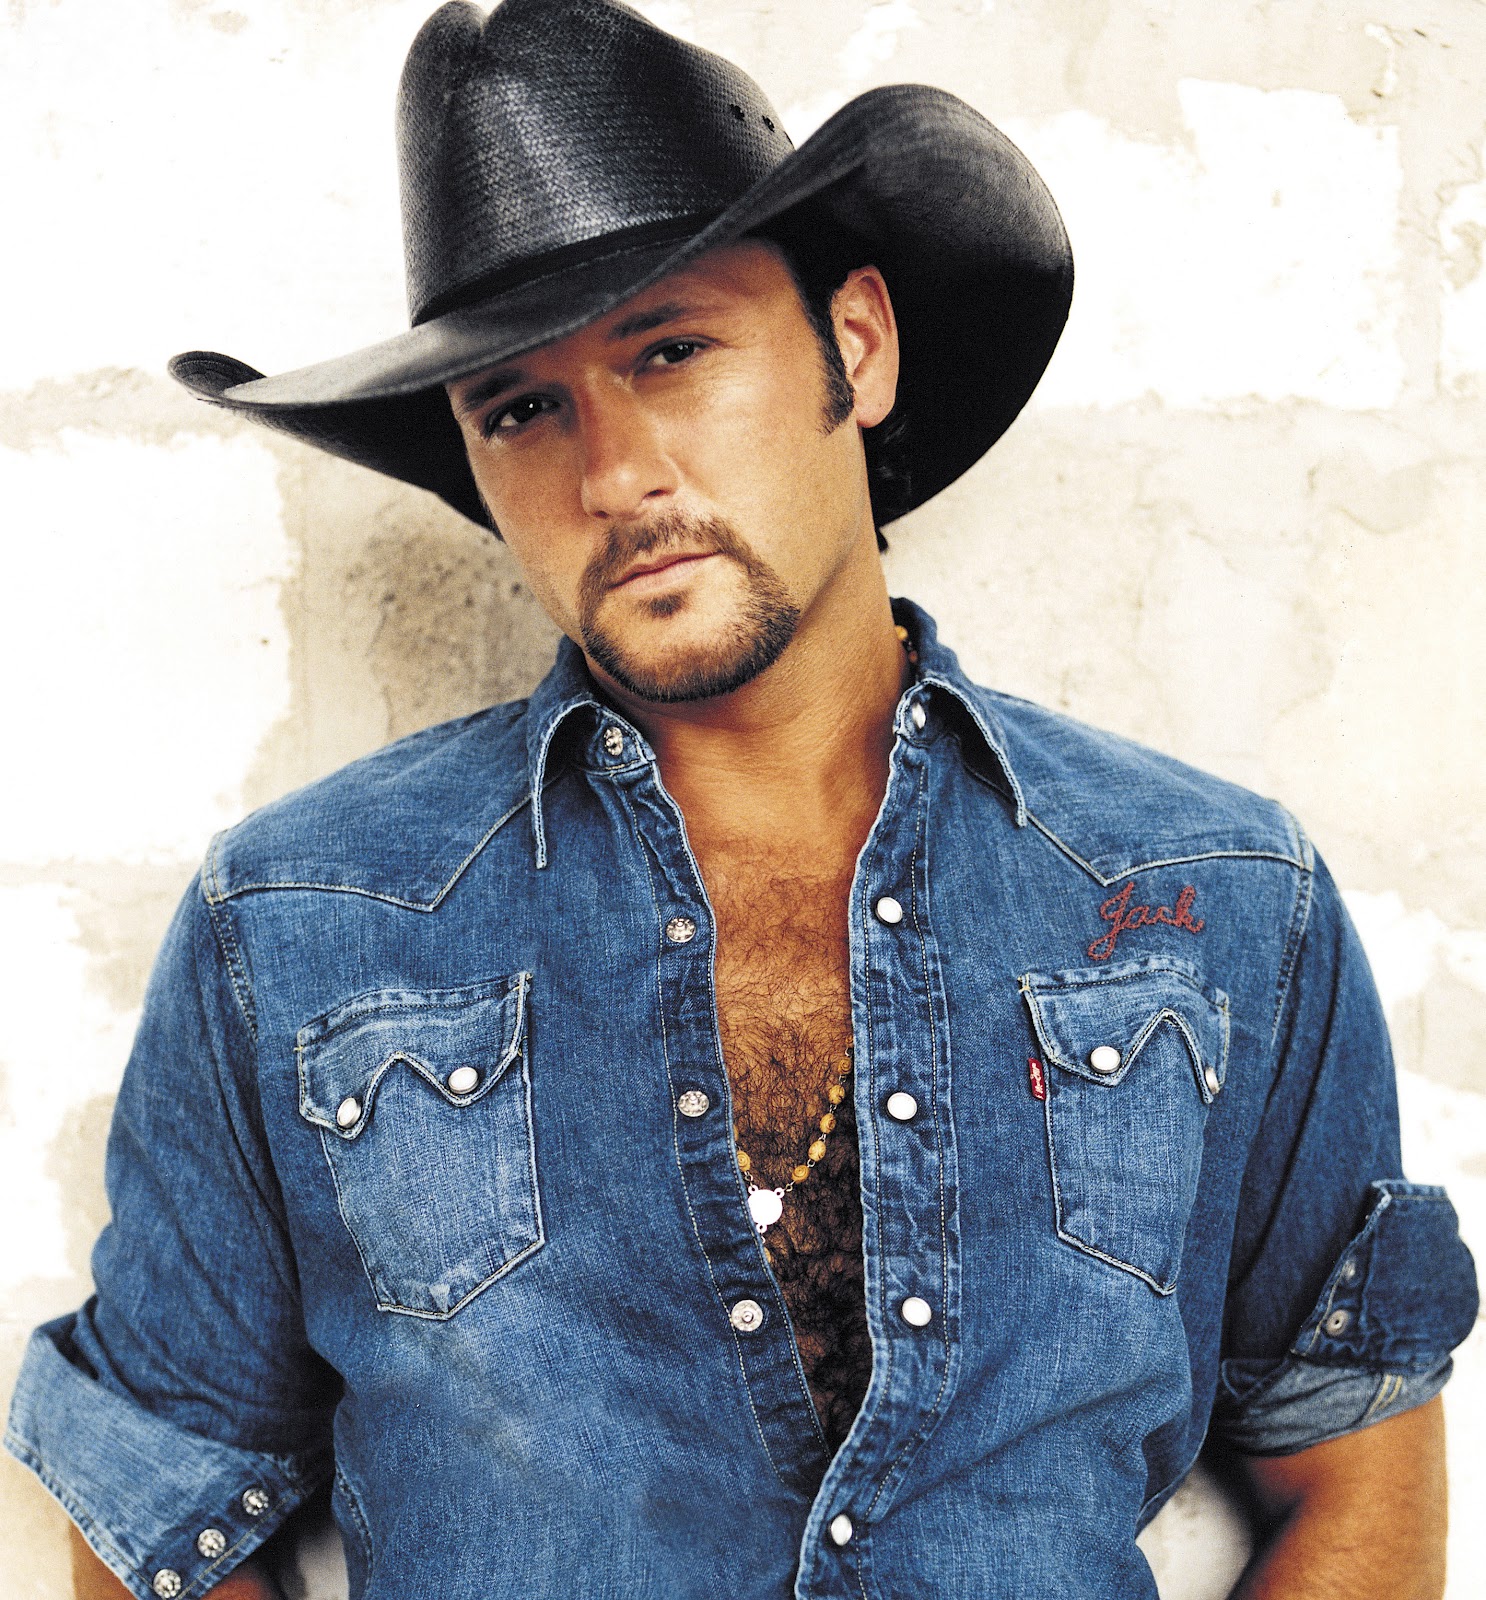 Laurie Whitlock's World : Tim McGraw